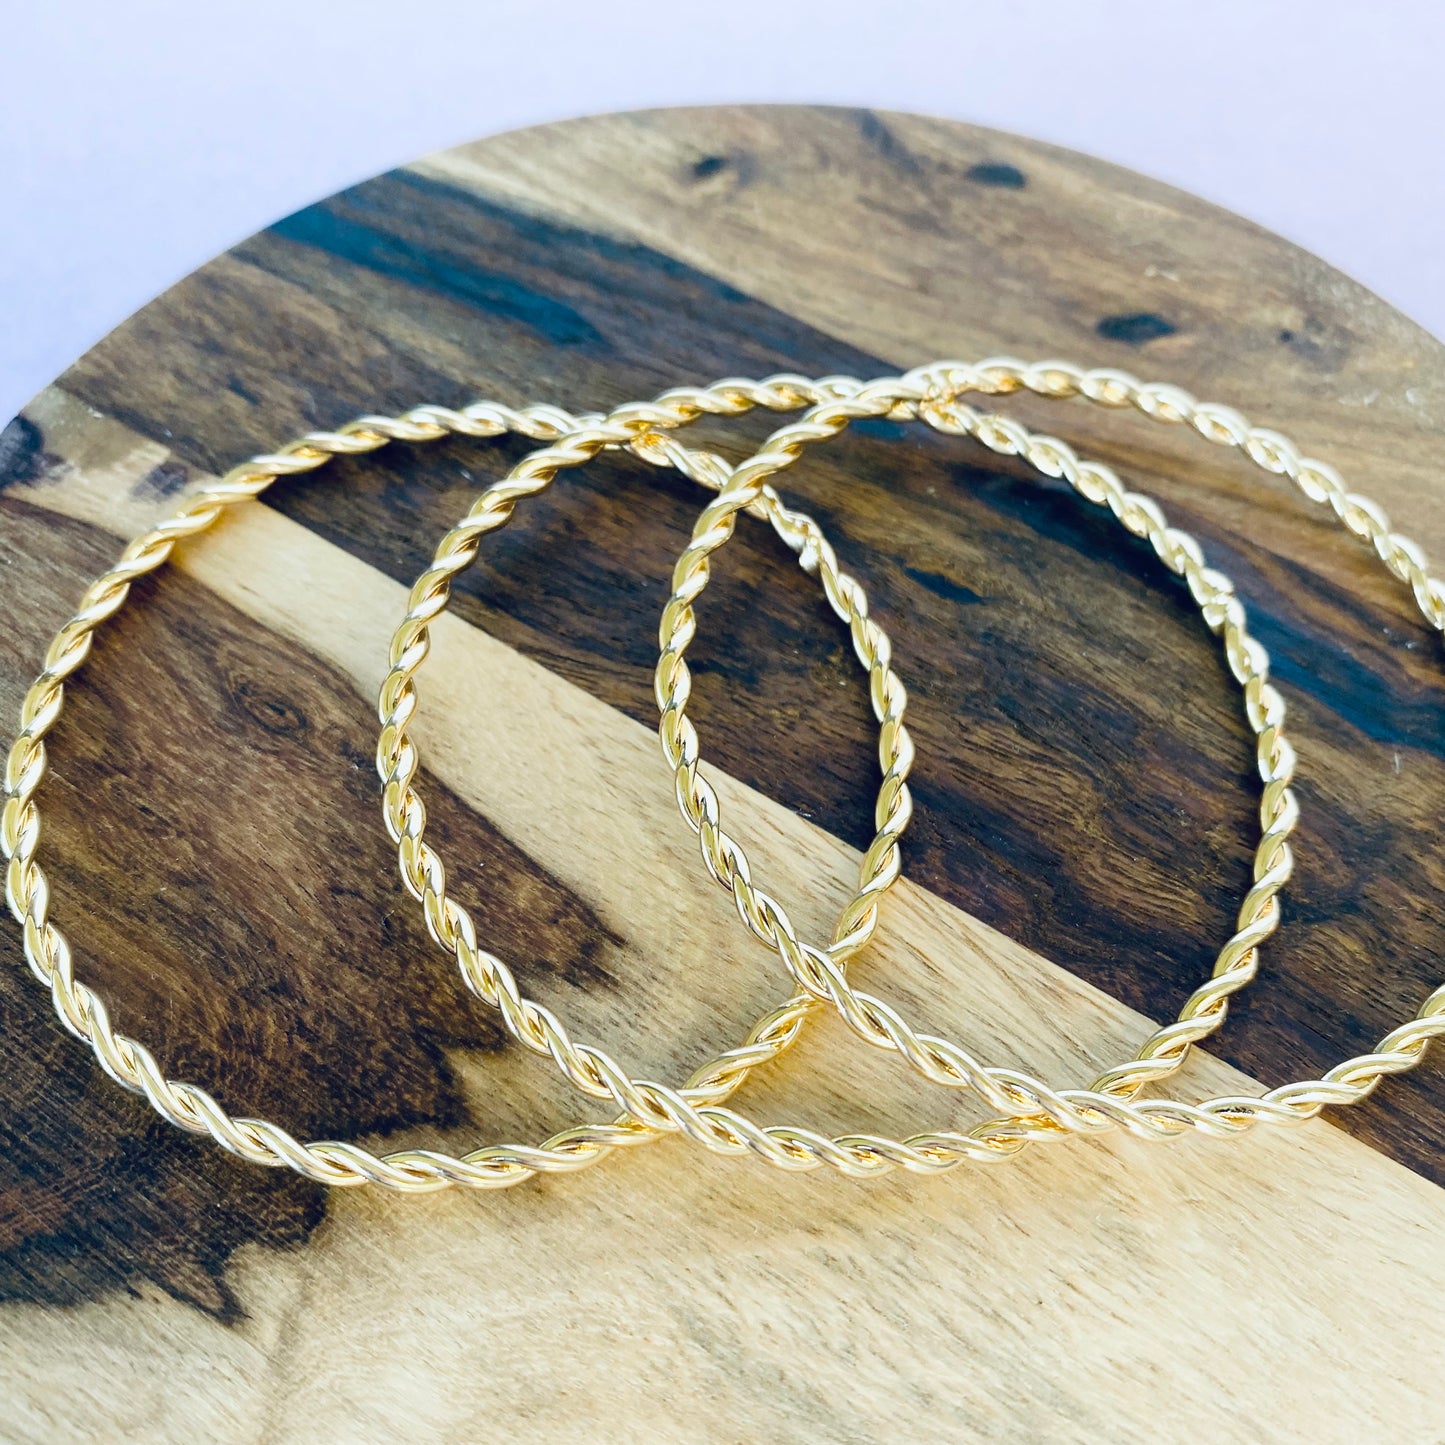 18K Gold Filled Thin Twisted Closed Bangles (Set of 3)